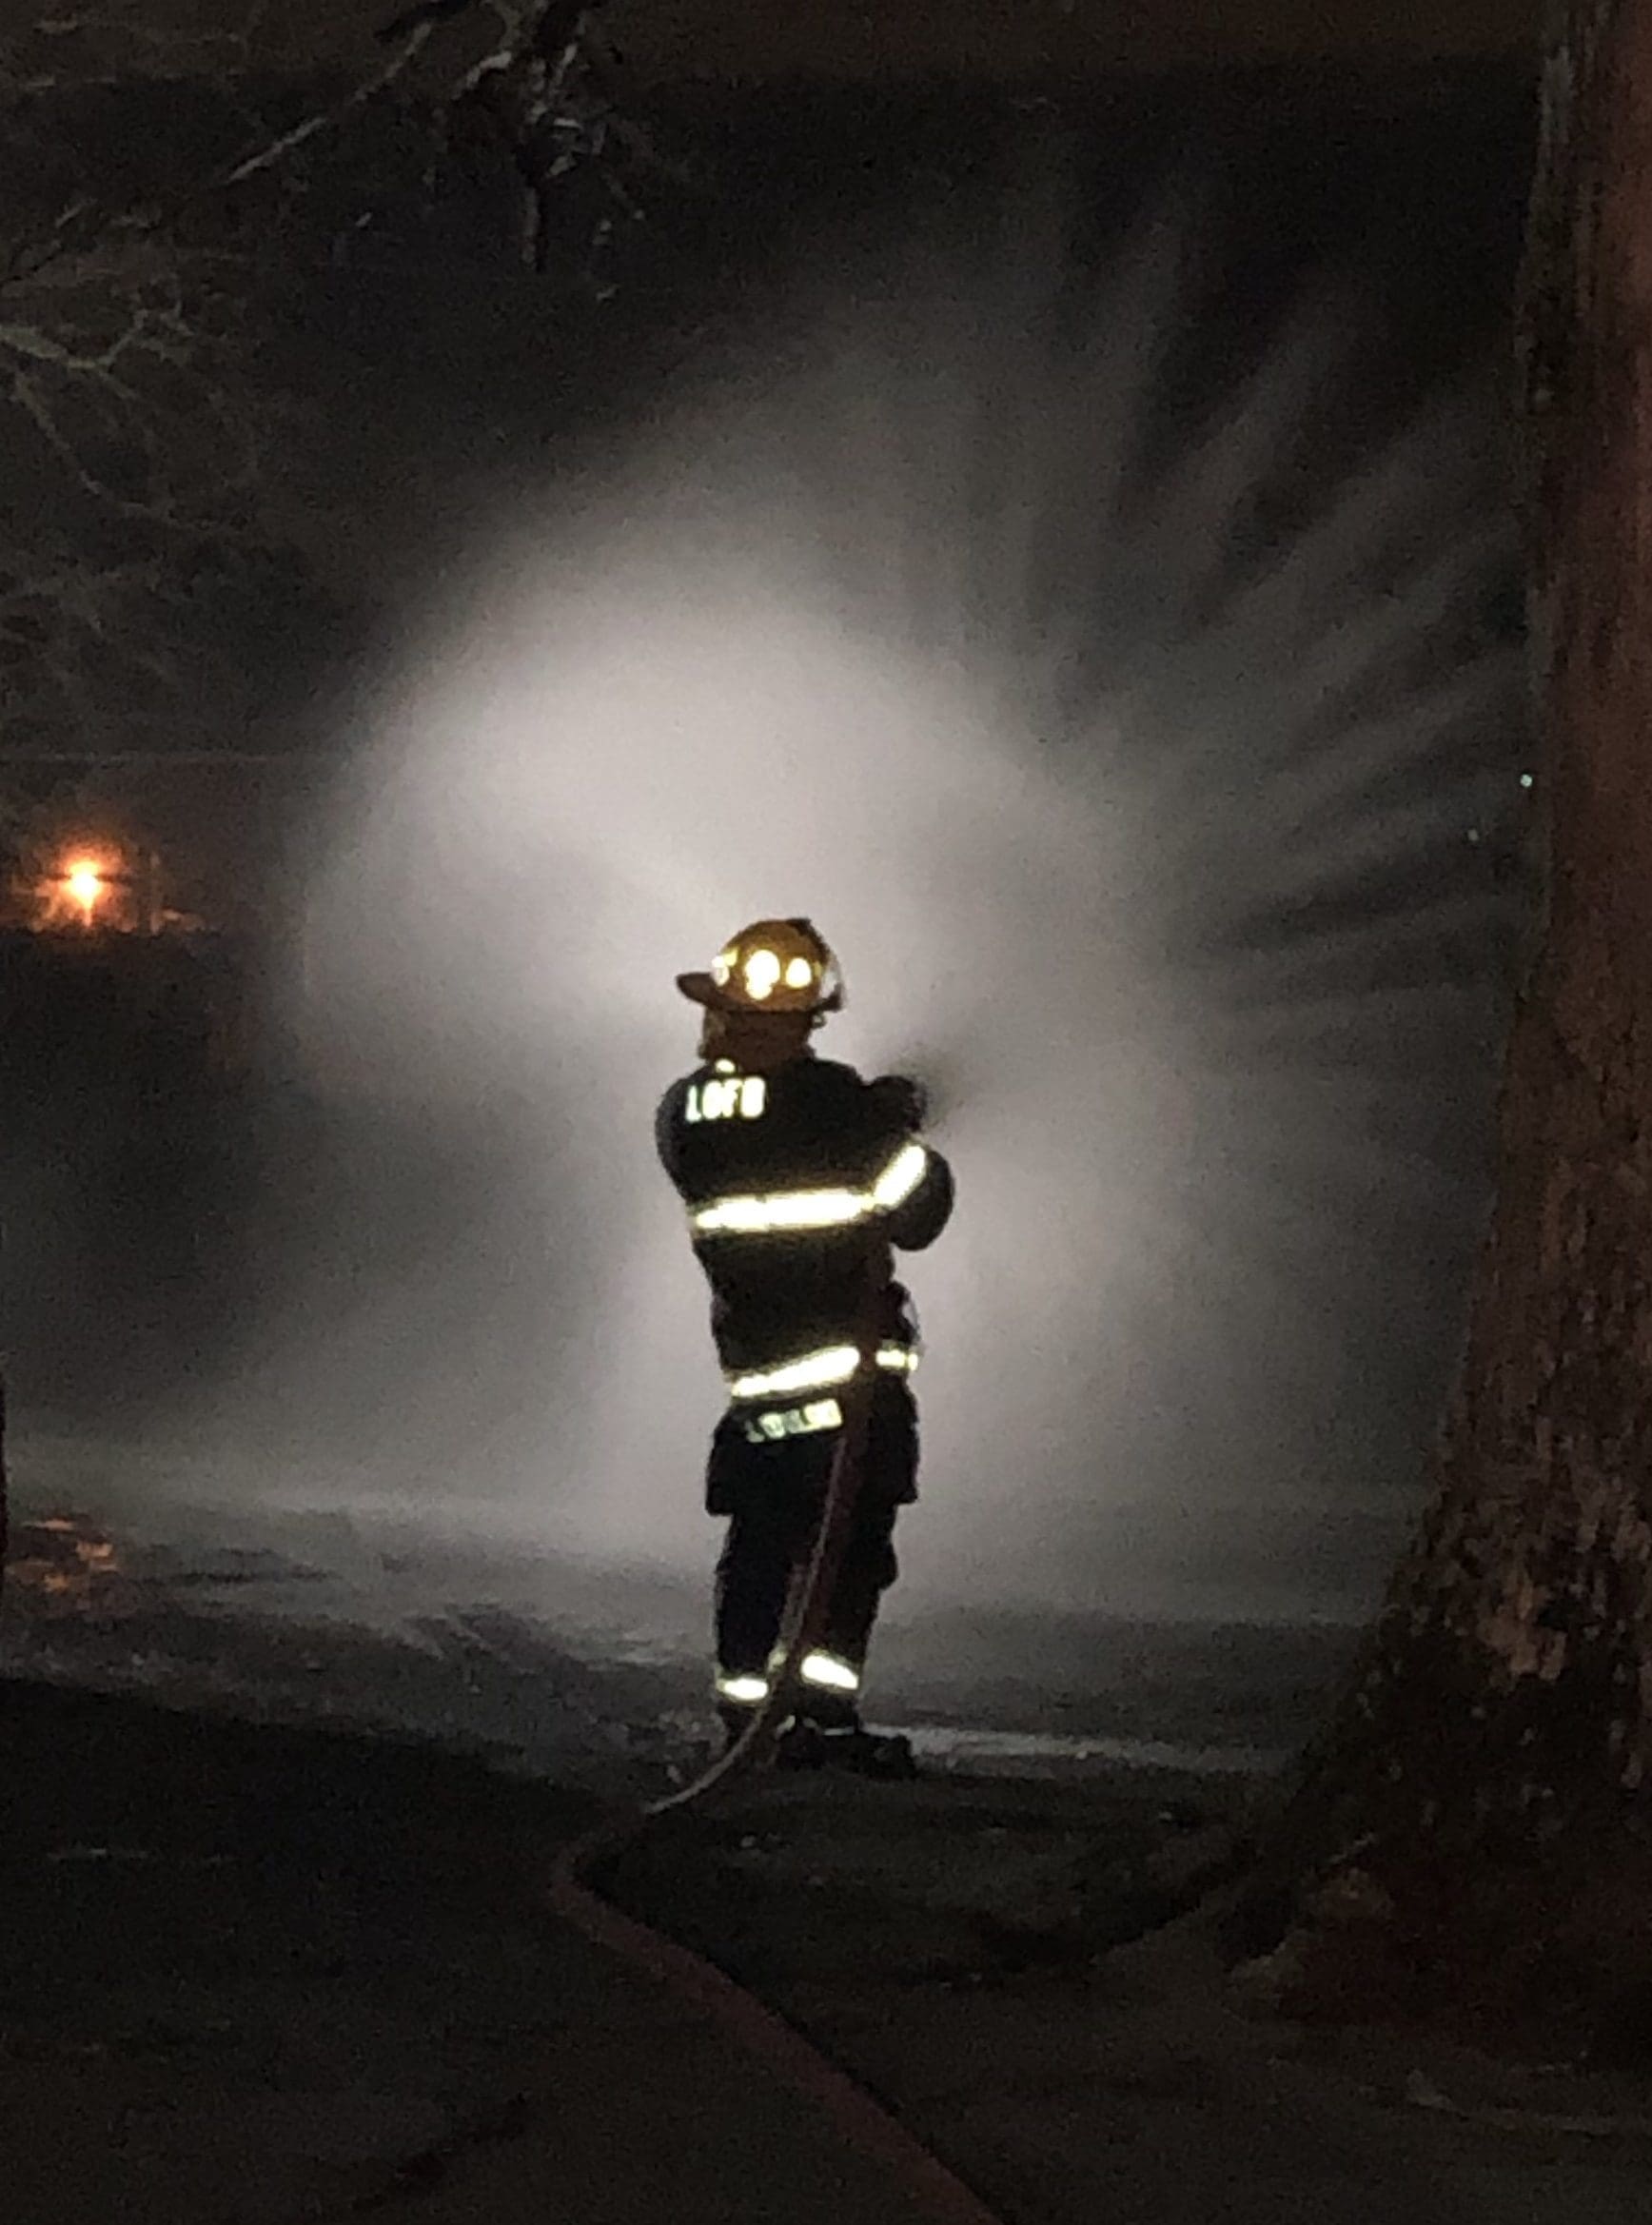 John R Kowalski uses a fire hose to extinguish a fire while working as a volunteer firefighter.